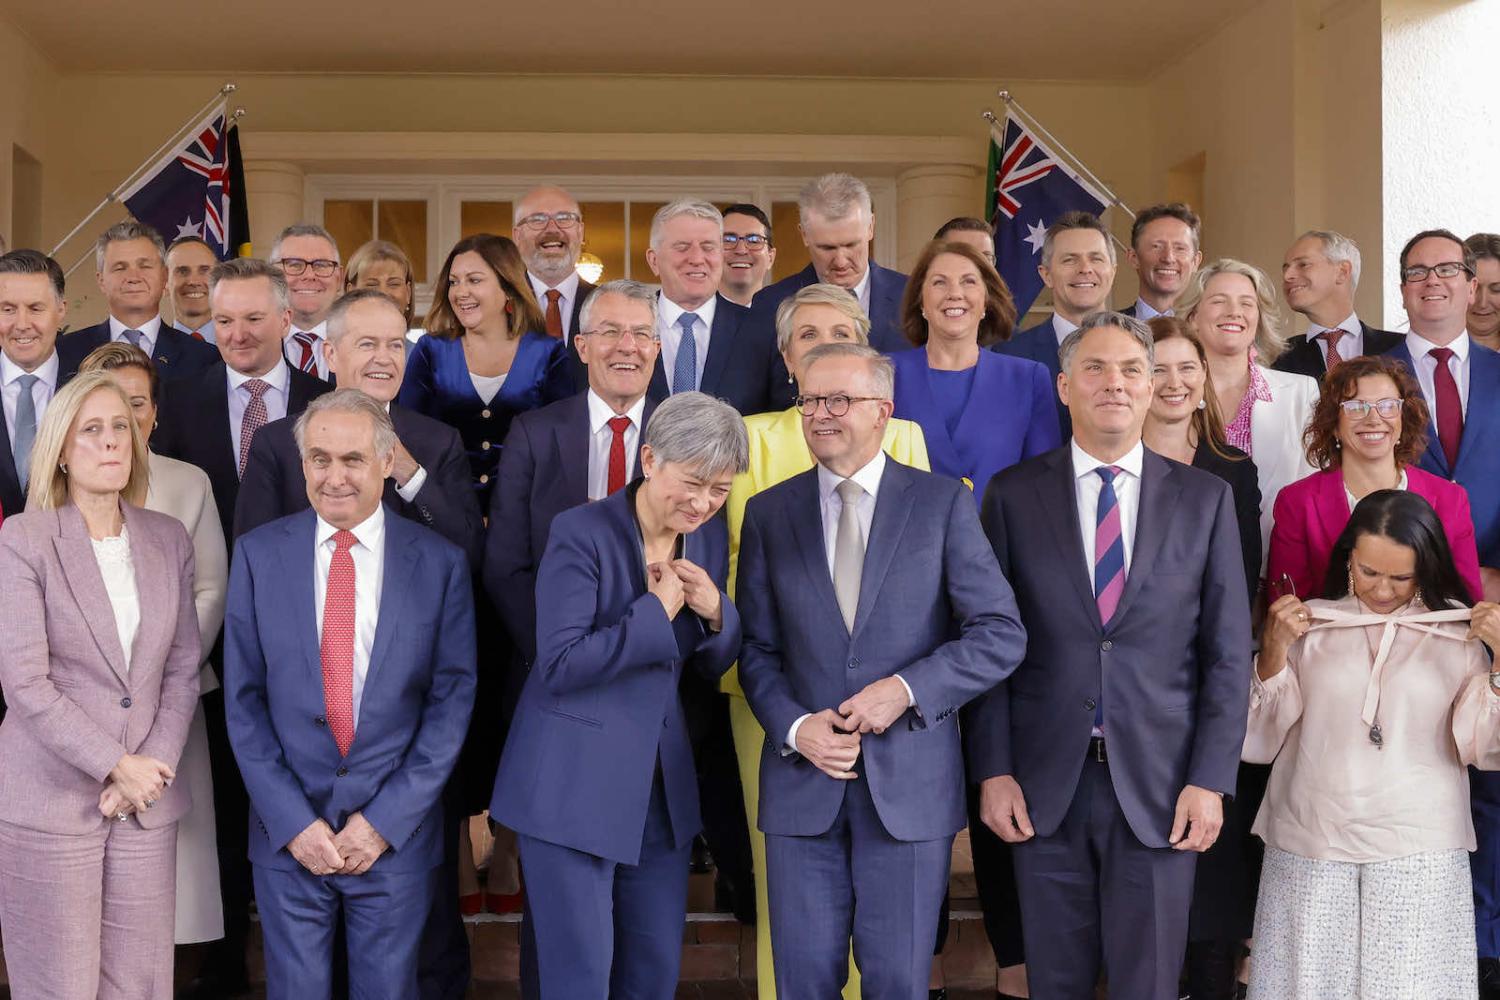 Prime Minister Anthony Albanese, front, fourth from the left, with his new cabinet, including Trade Minister Don Farrell, second left, Foreign Minister Penny Wong, third left, and Defence Minister Richard Marles, second right (Jenny Evans/Getty Images)